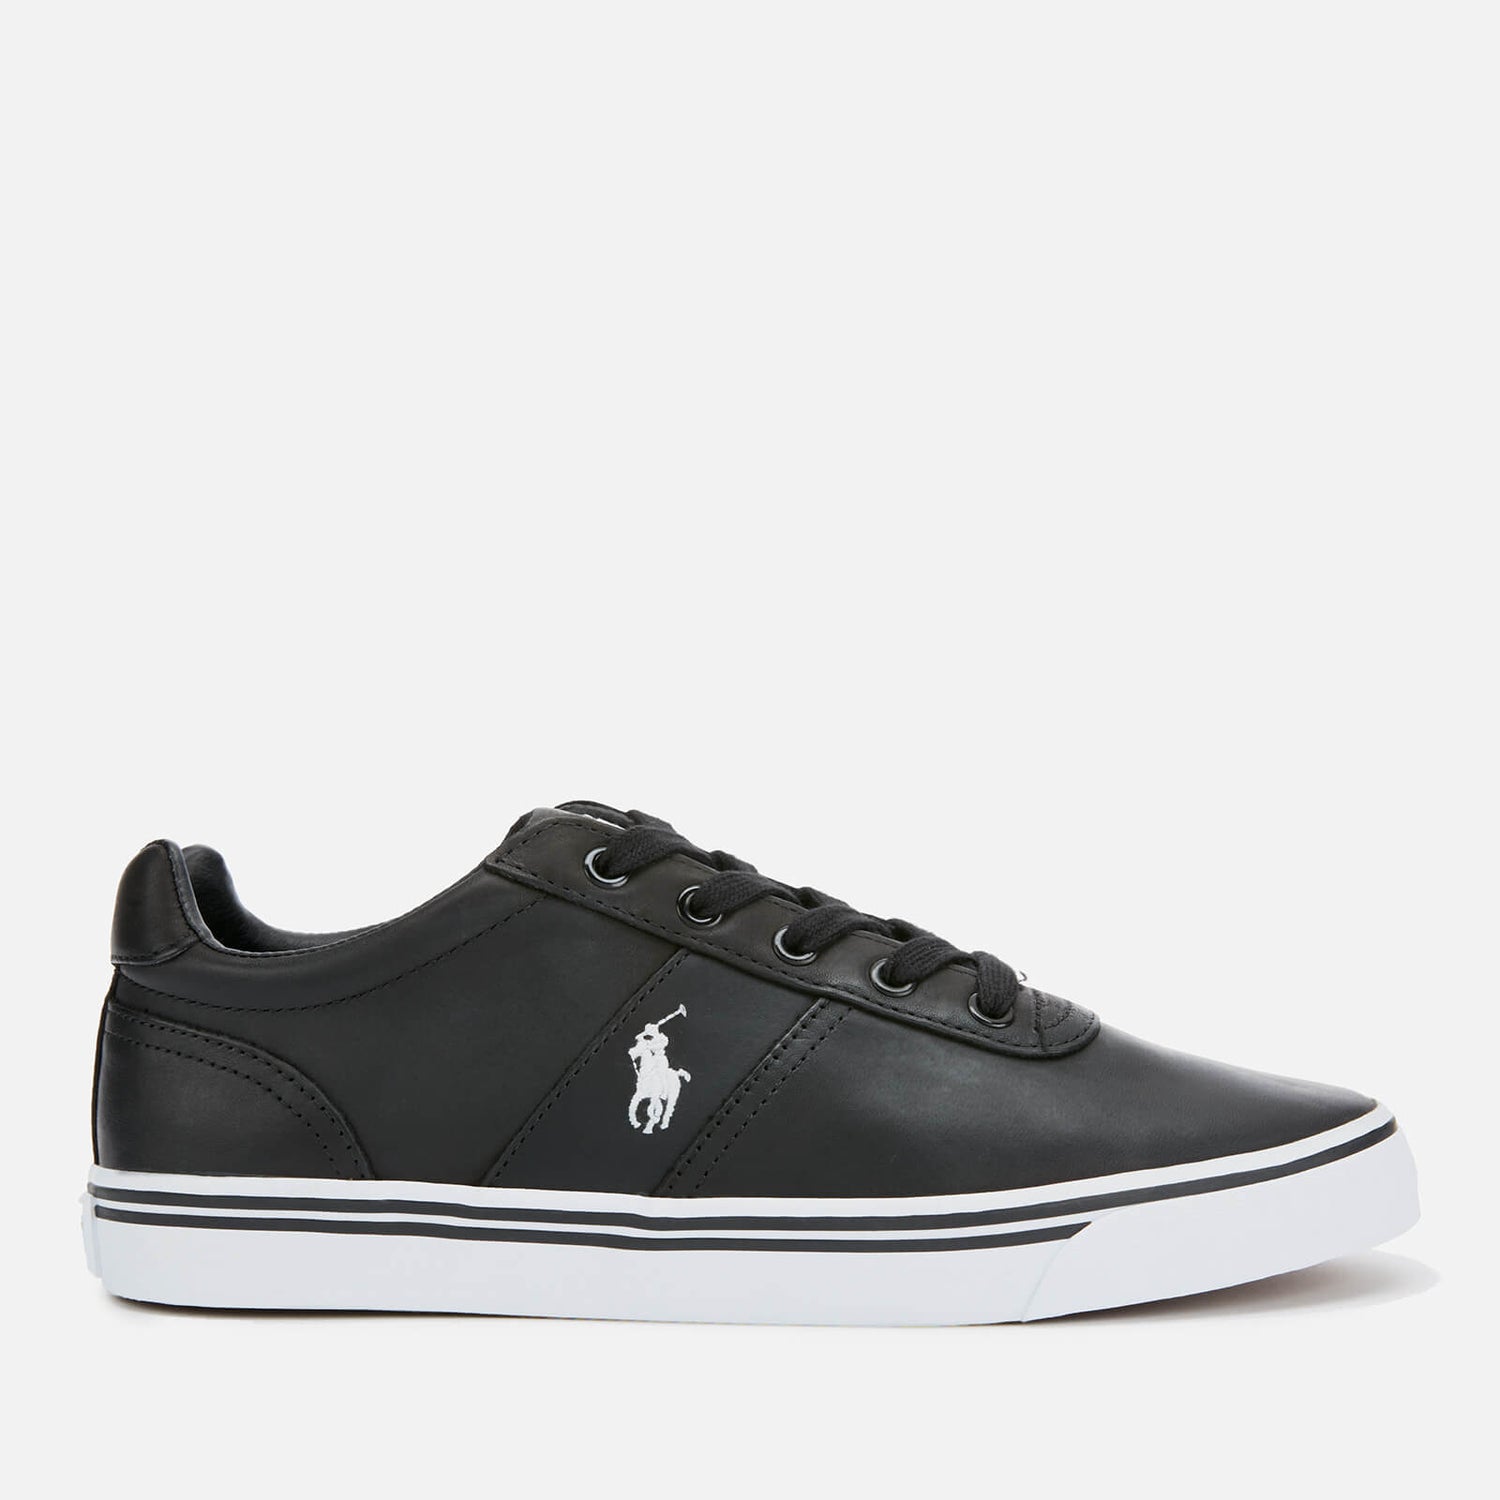 Polo Ralph Lauren Men's Hanford Leather Trainers - Black - Free UK ...